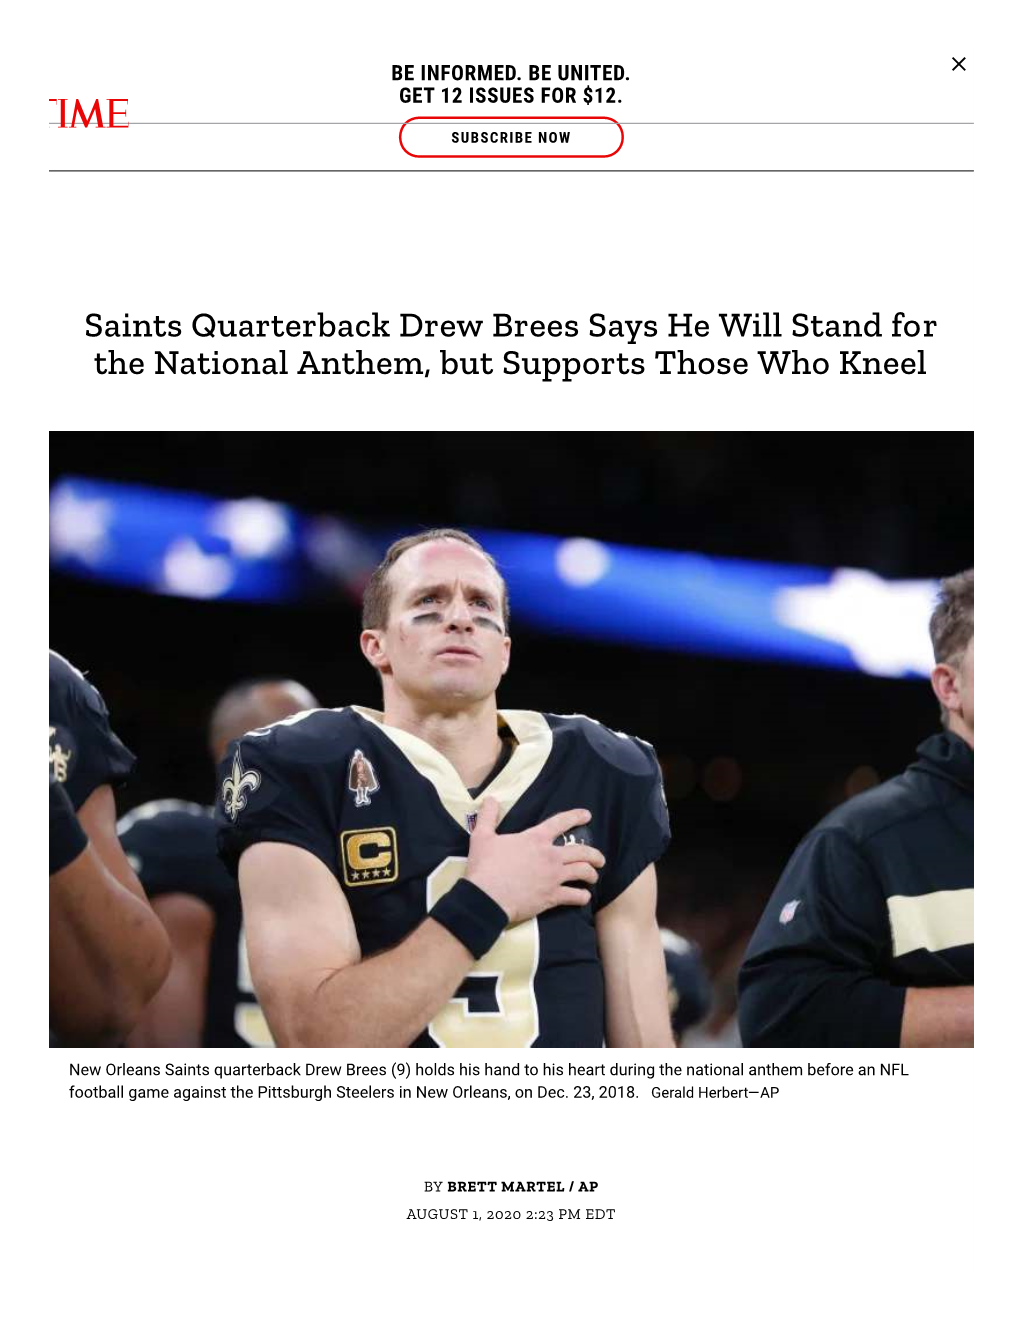 Saints Quarterback Drew Brees Says He Will Stand for the National Anthem, but Supports Those Who Kneel